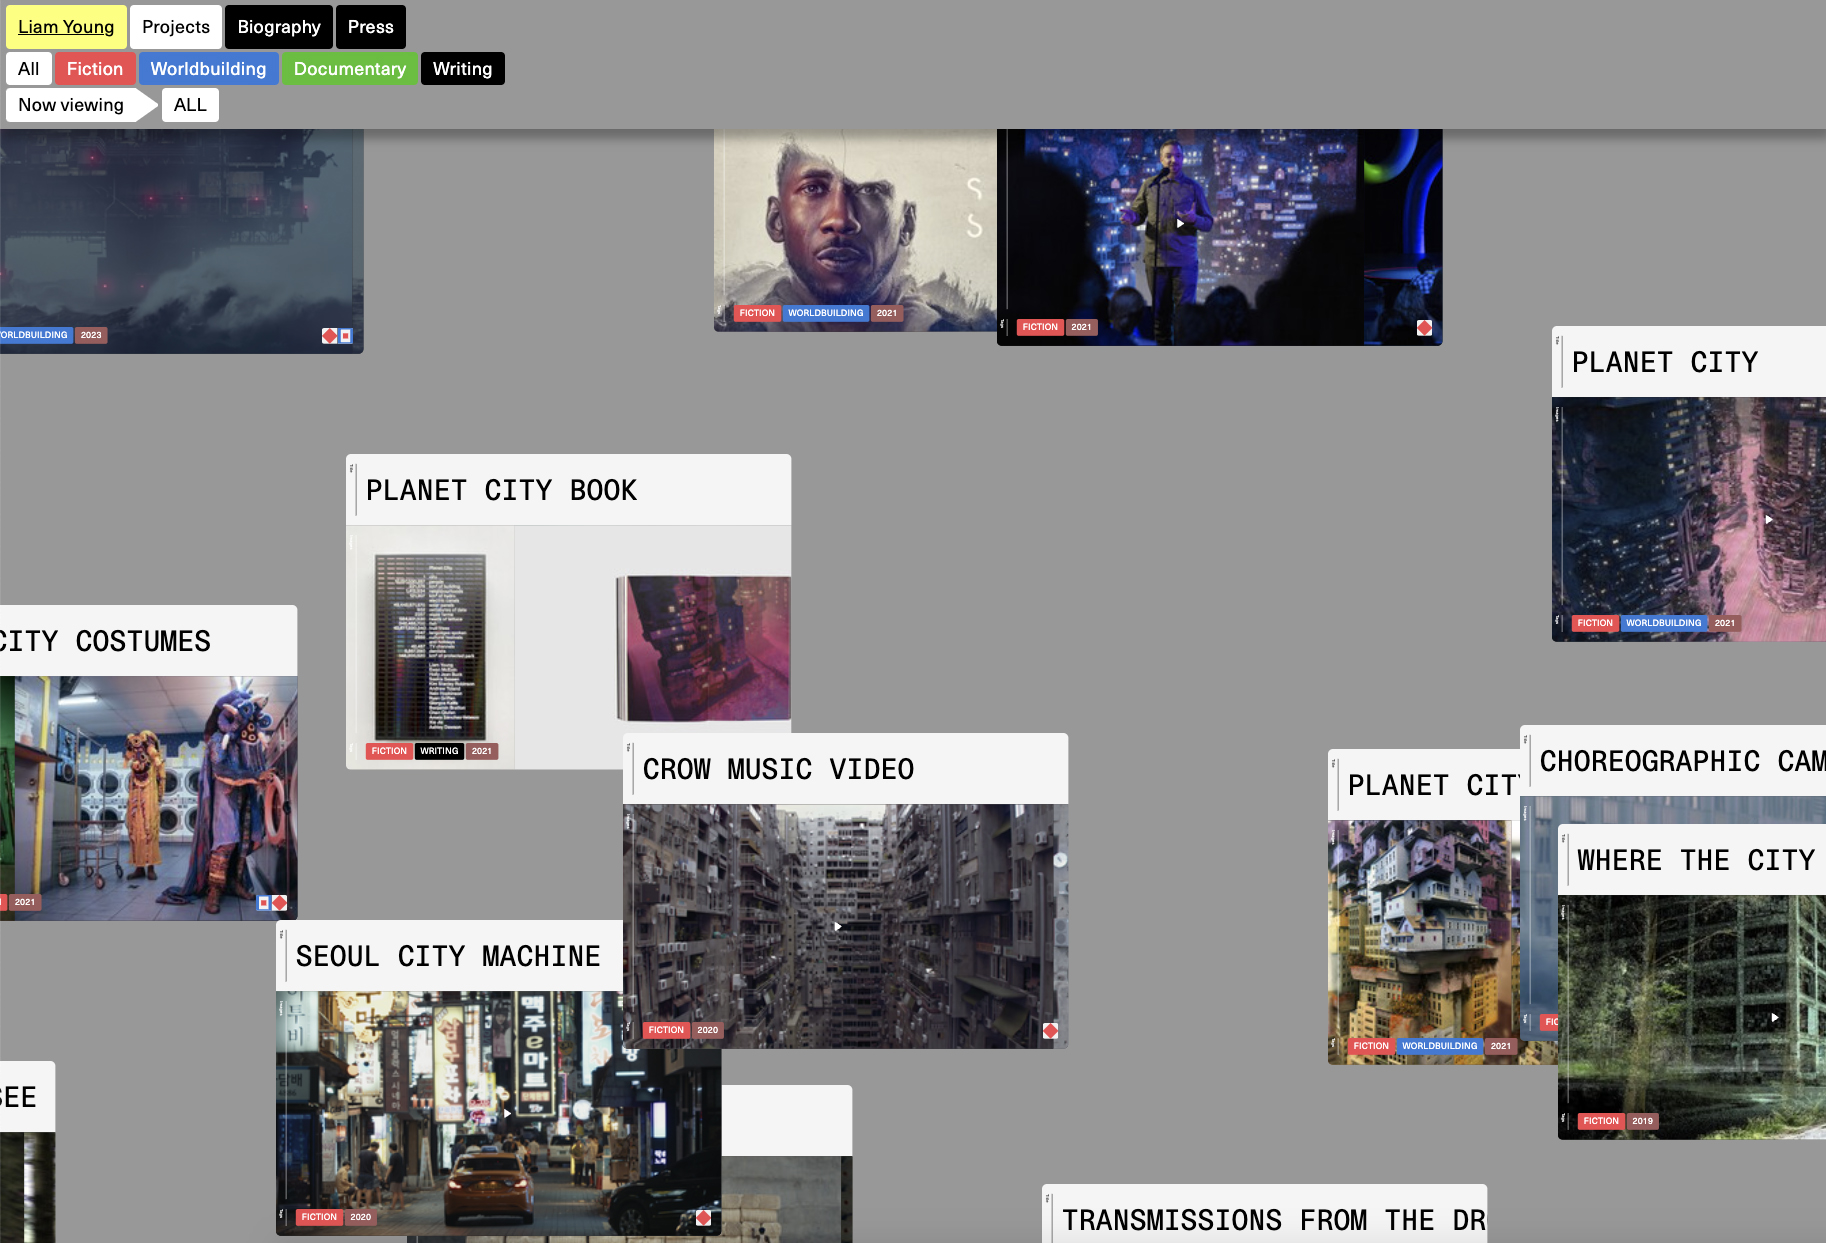 A screenshot of the artist Liam Young's webpage which has a floating array of smaller screens that show his various projects.